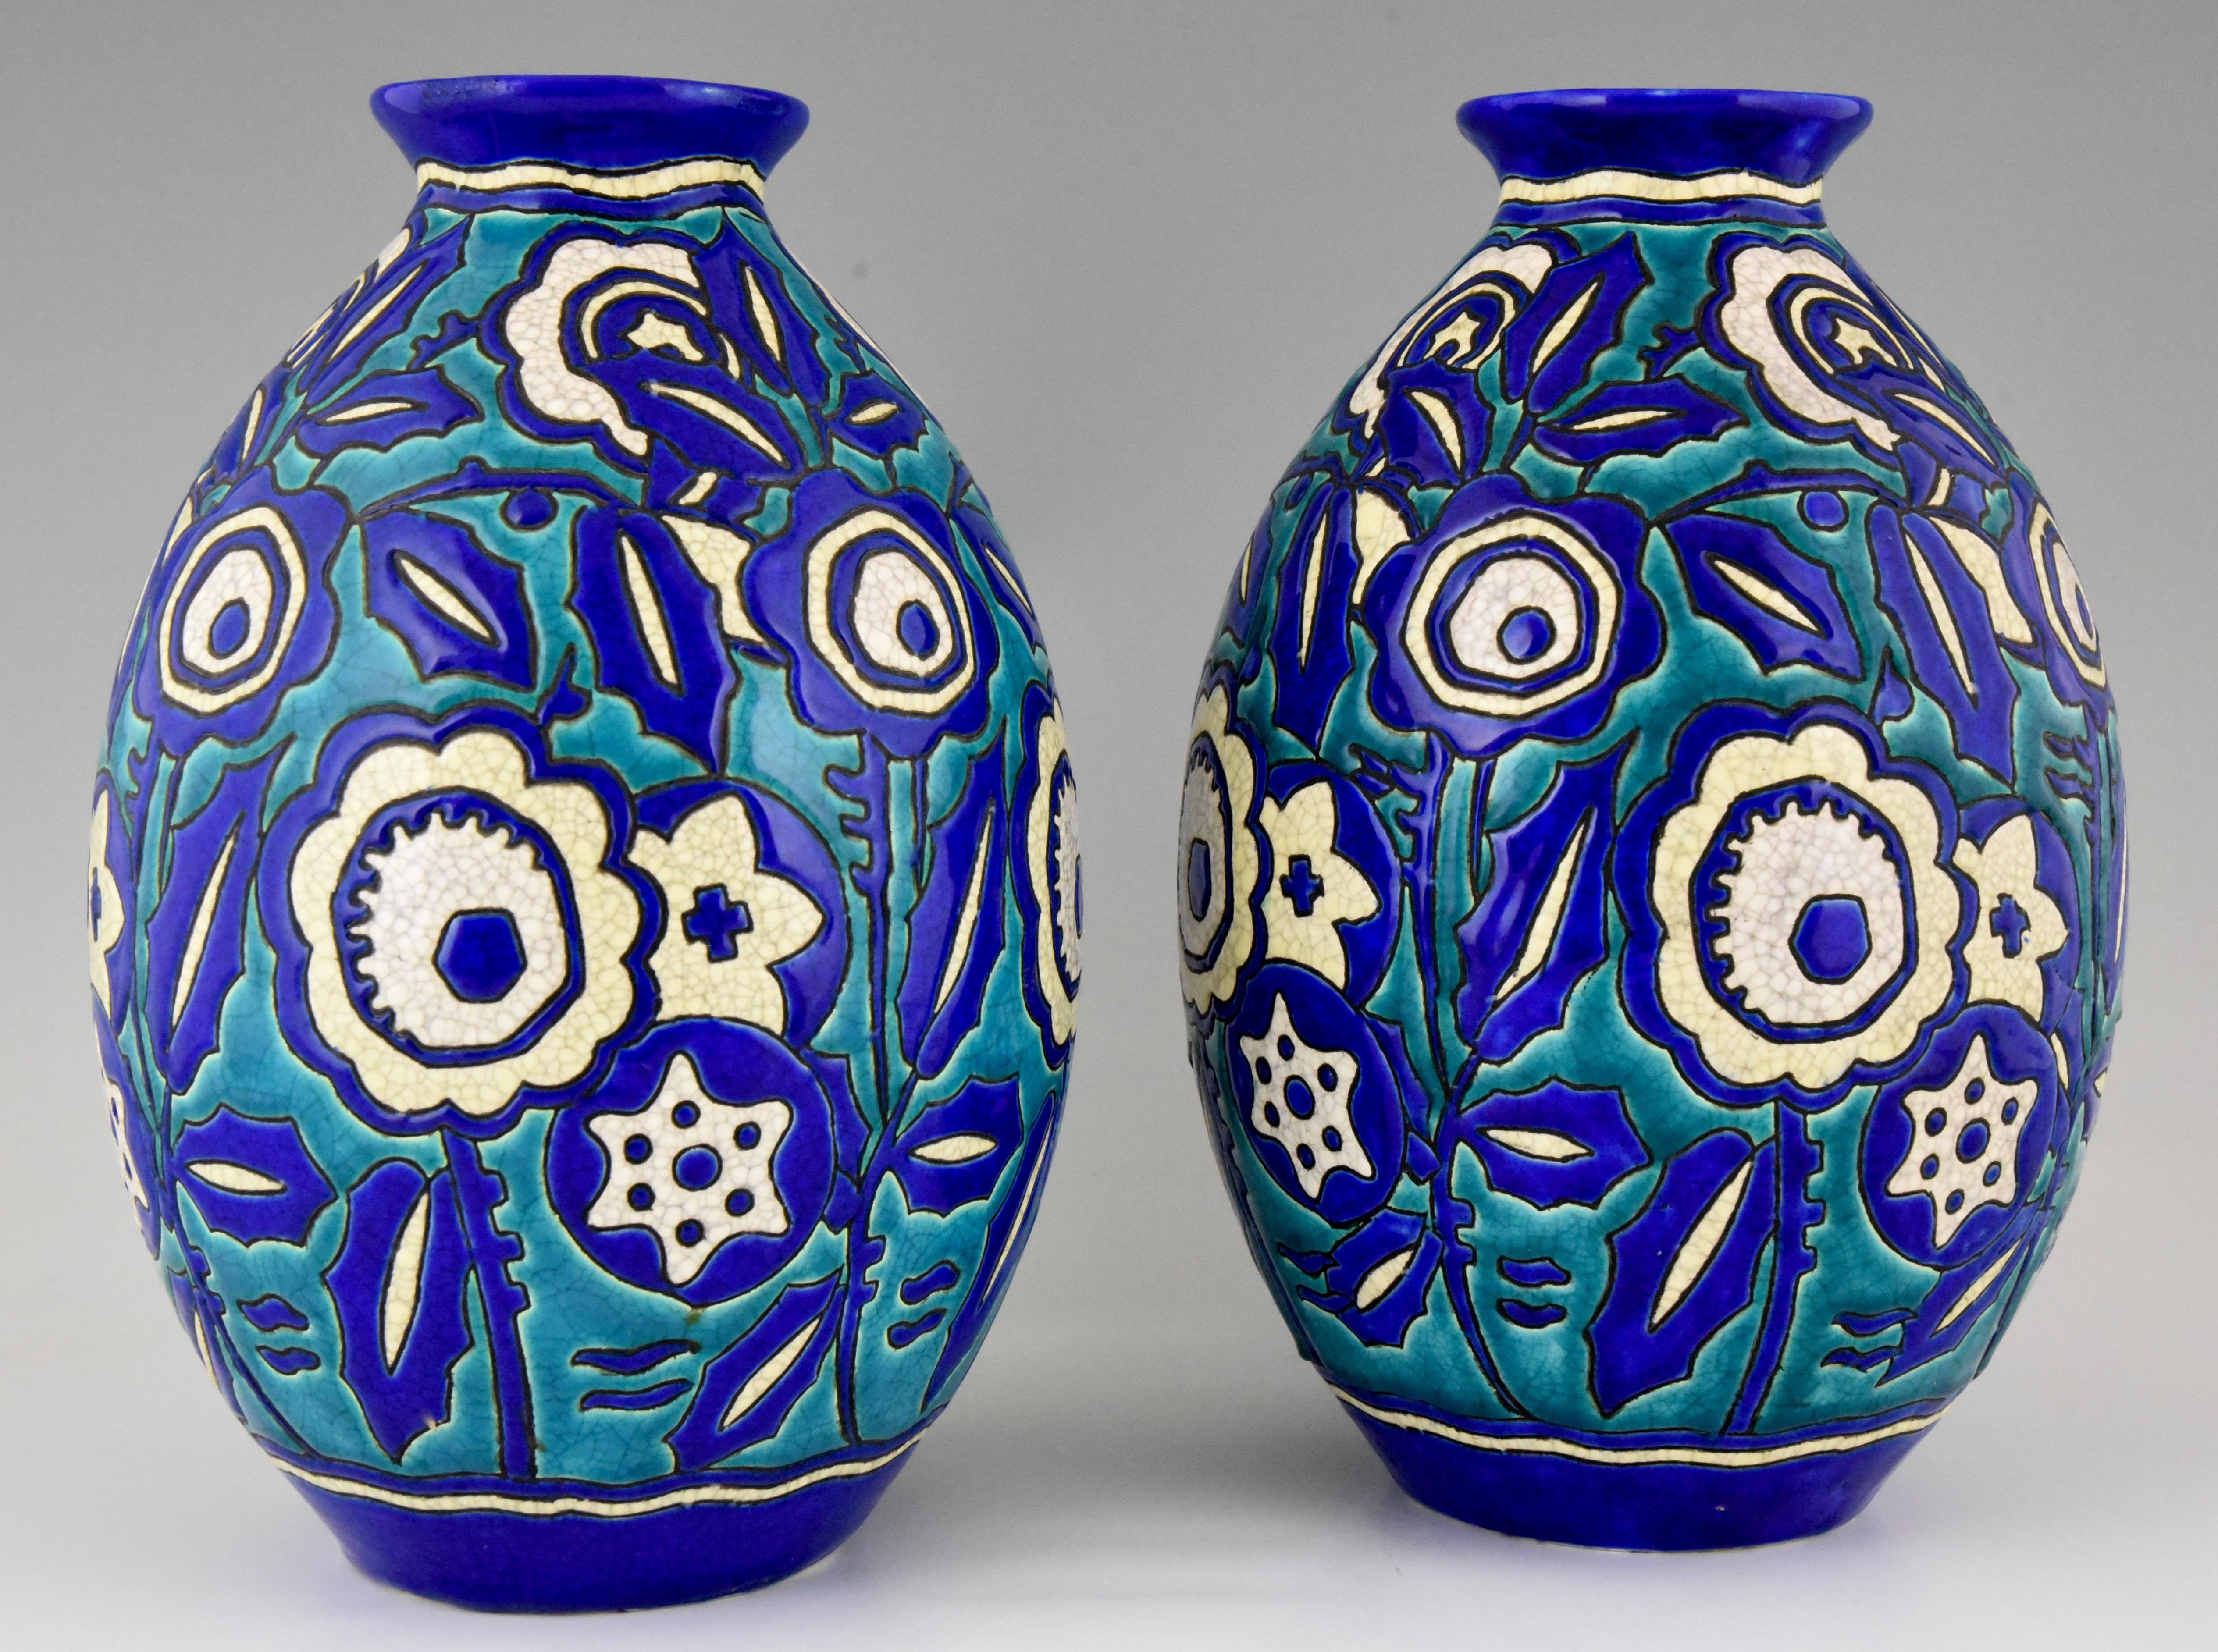 Beautiful pair of large Art Deco vases in craquelé ceramic design by Charles Catteau for Keramis, Belgium. Great shape and lovely color combination of blue, turquise, pale yellow and white. Signed by the artist and numbered. 
Belgium 1929.
This